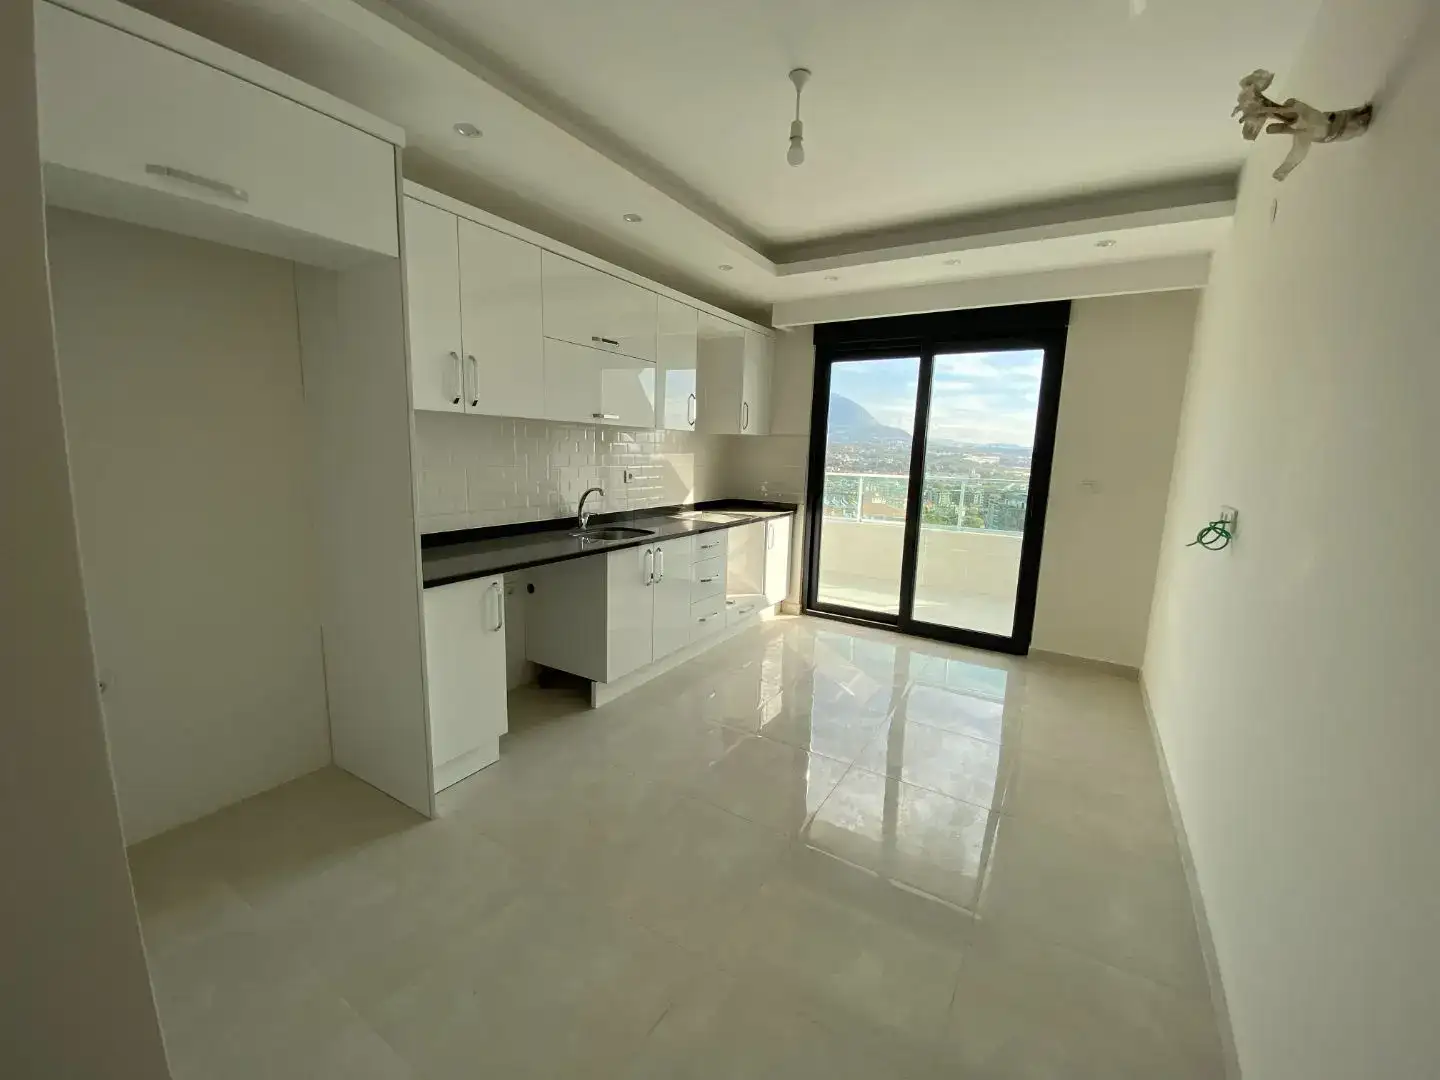 4+1 DPX APARTMENT FOR SALE IN A NEWLY BUILT BUILDING IN ÇIPLAKLI